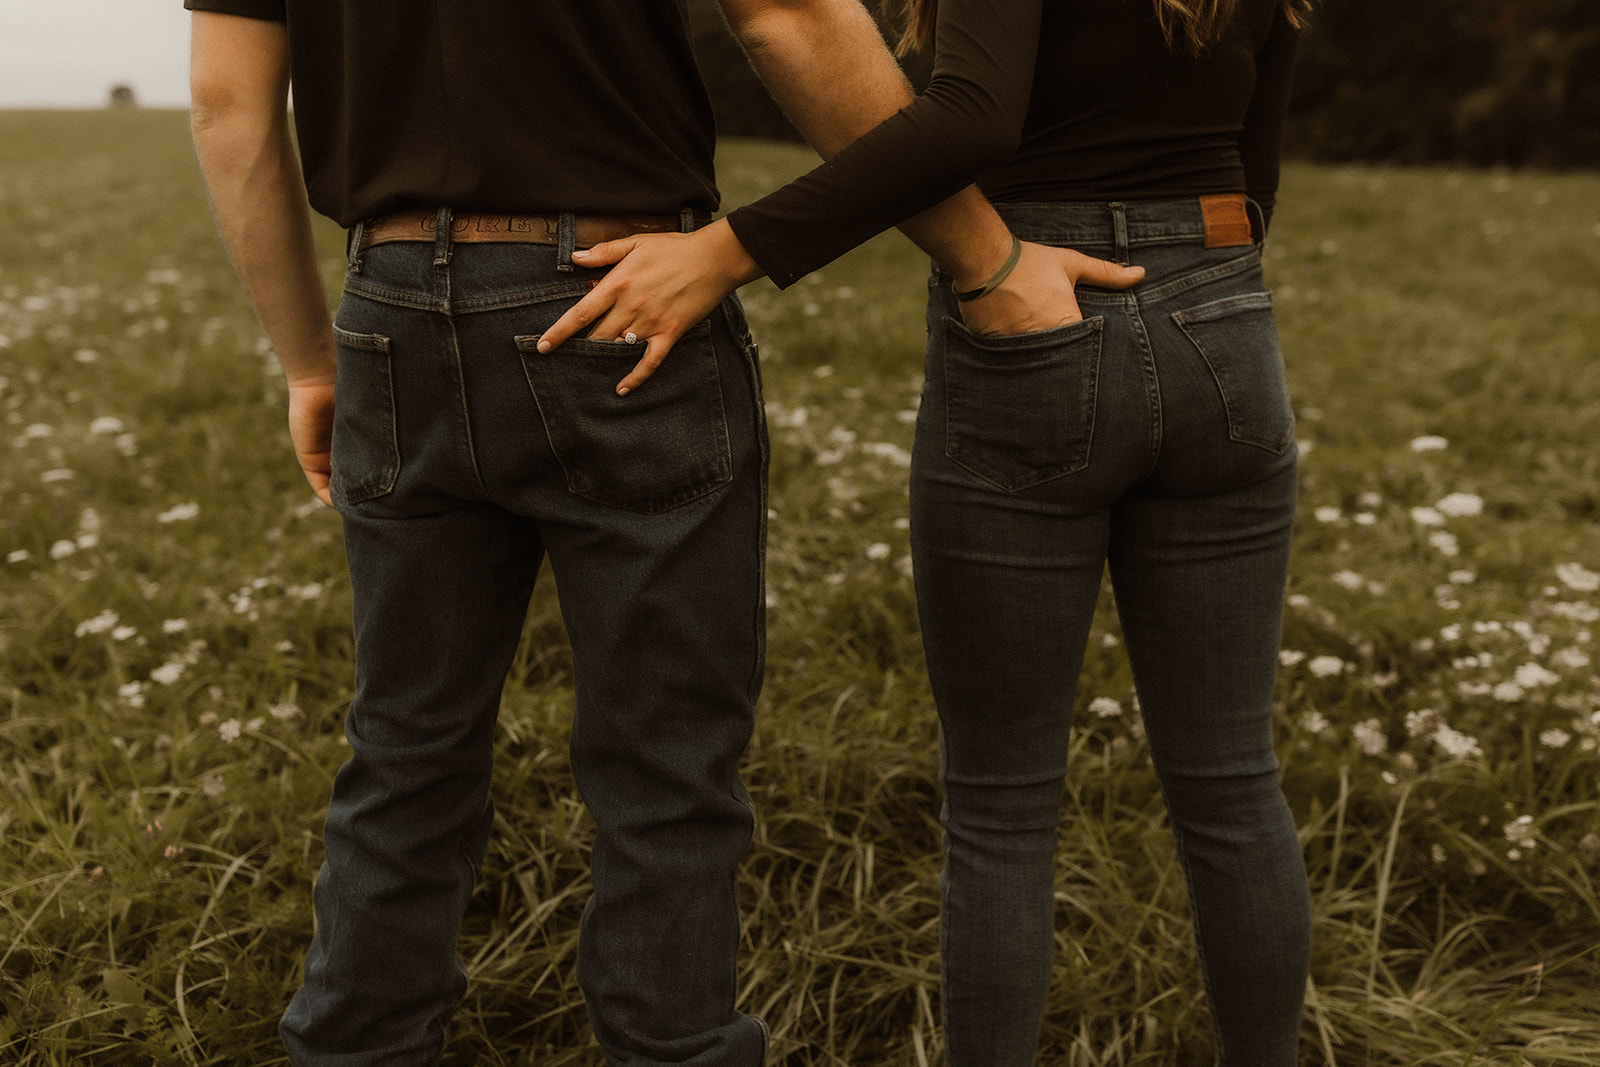 Couple pose with their hands in each others back jean pockets during their dreamy upstate NY fall engagement photos